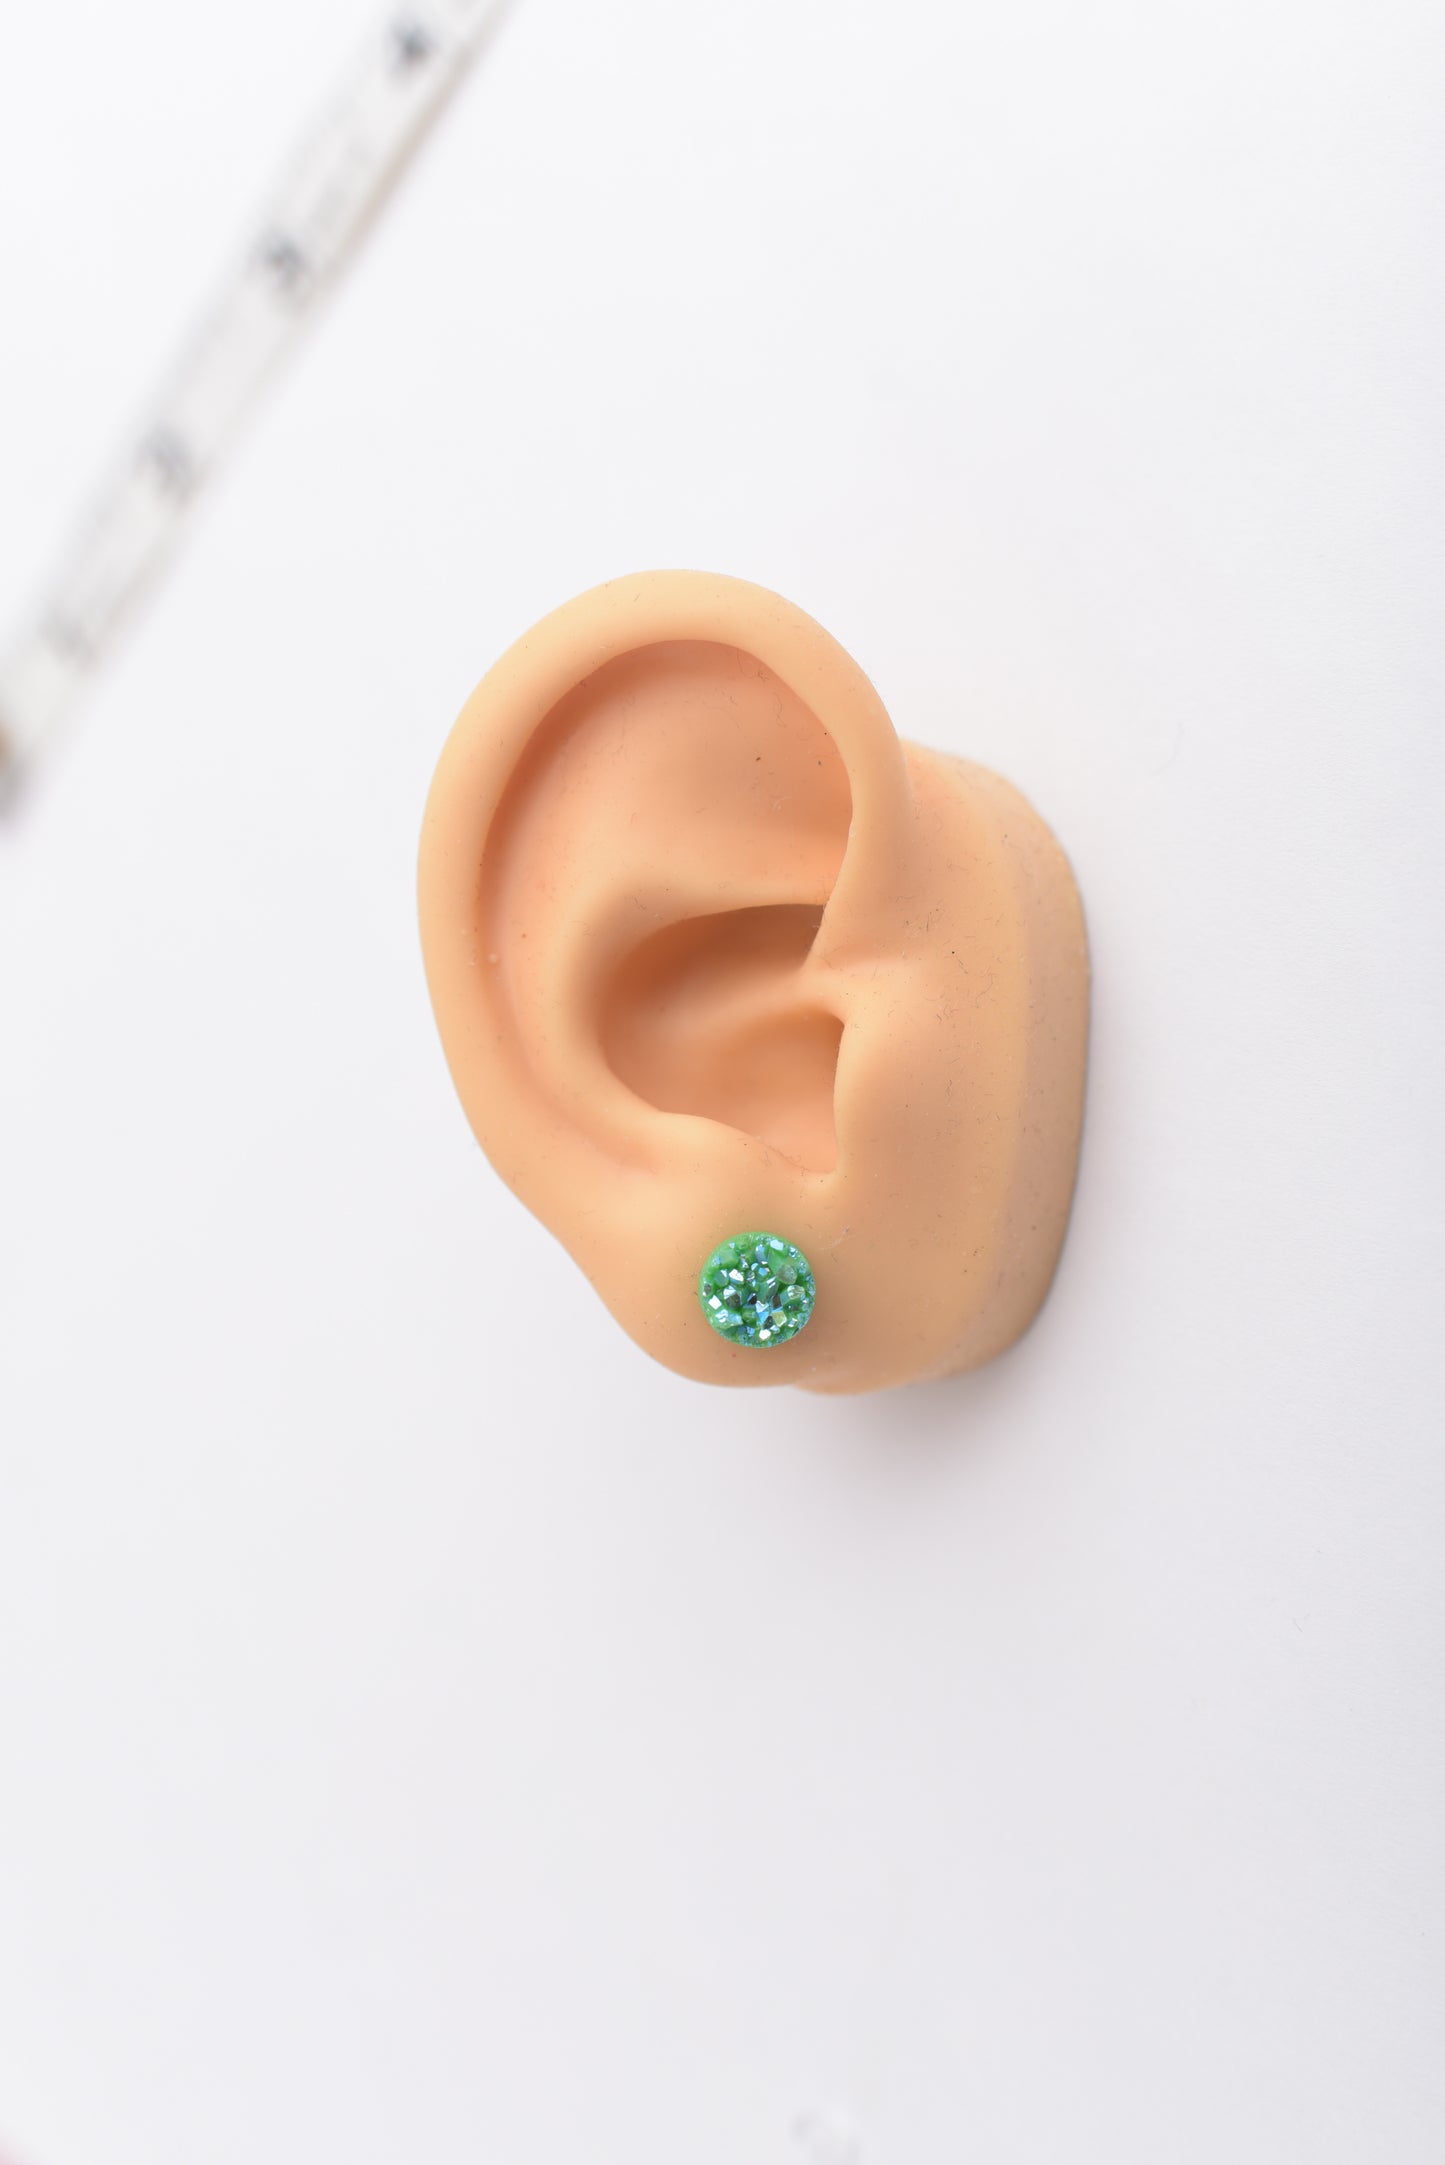 Mini Novelty Earring Trio with Titanium Posts- Choose from 5 Colors